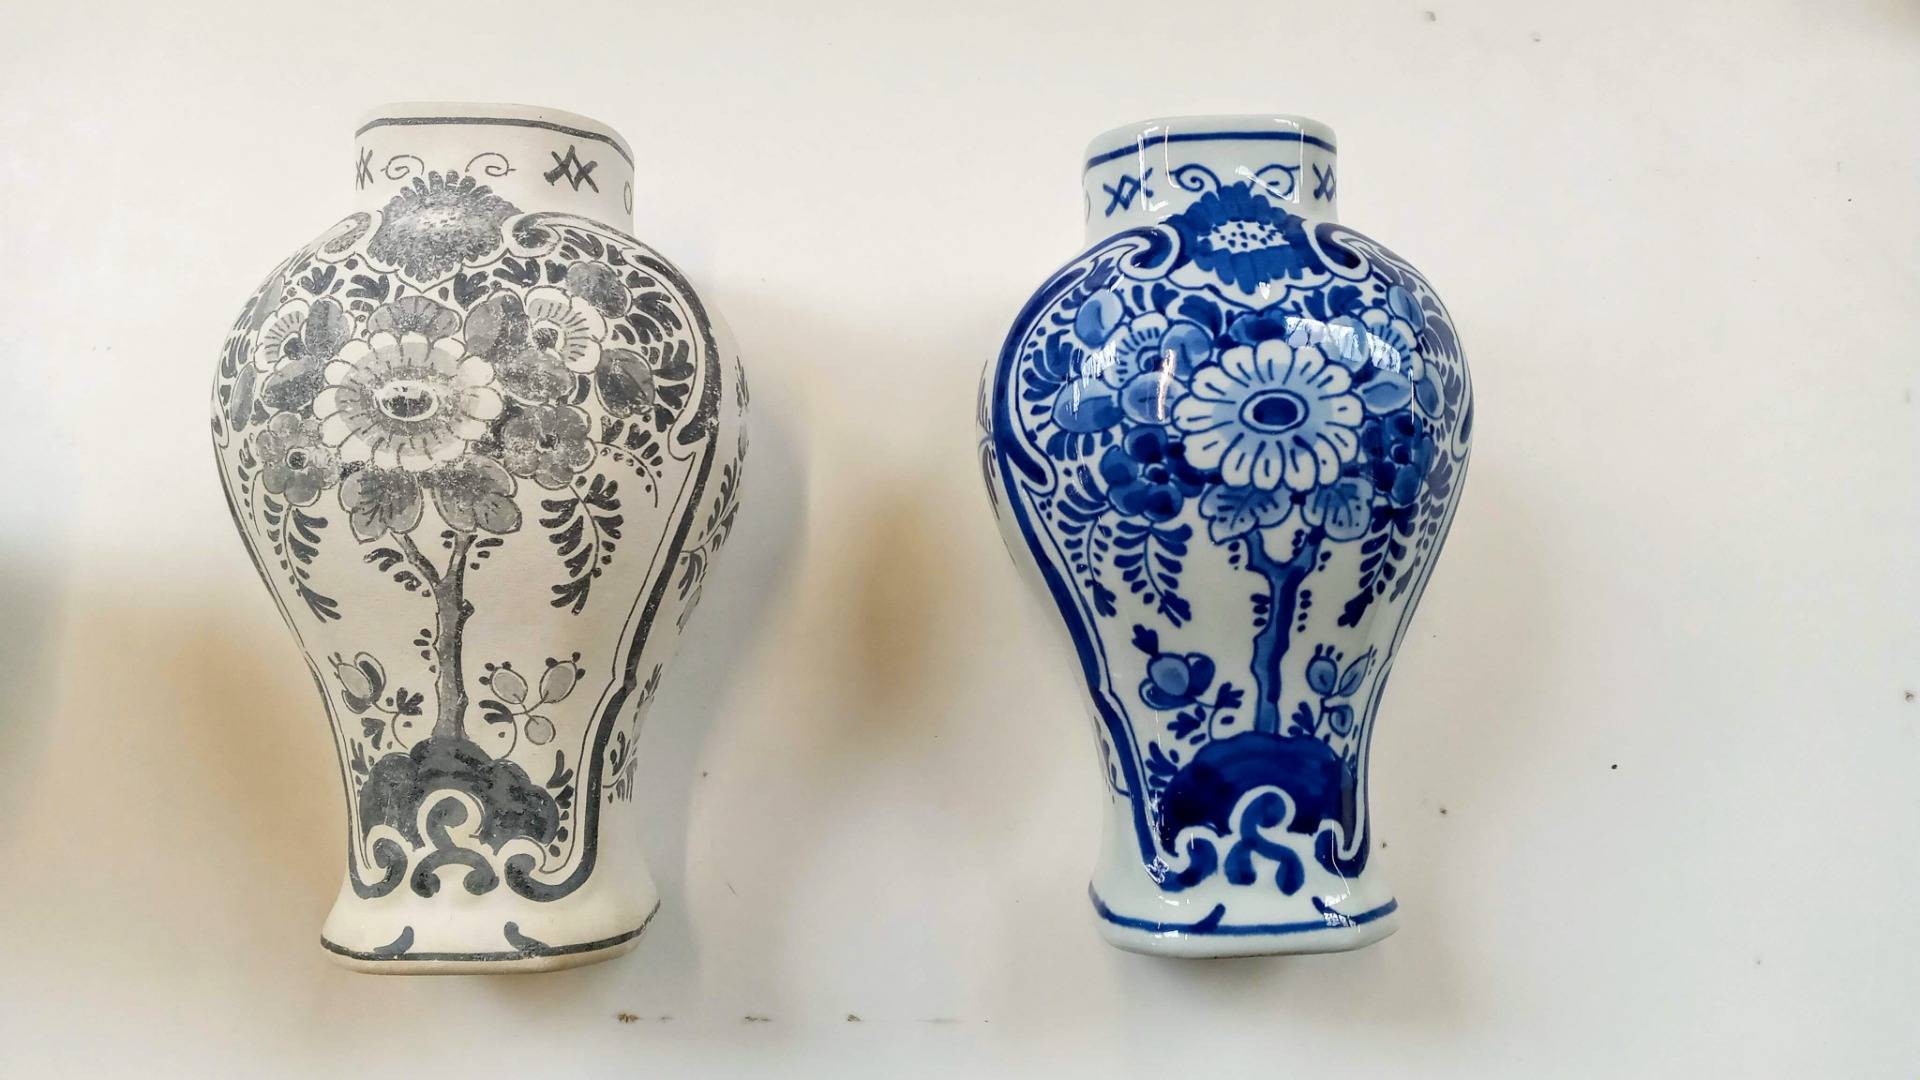 The Delft blue pottery before and after the glaze/fire